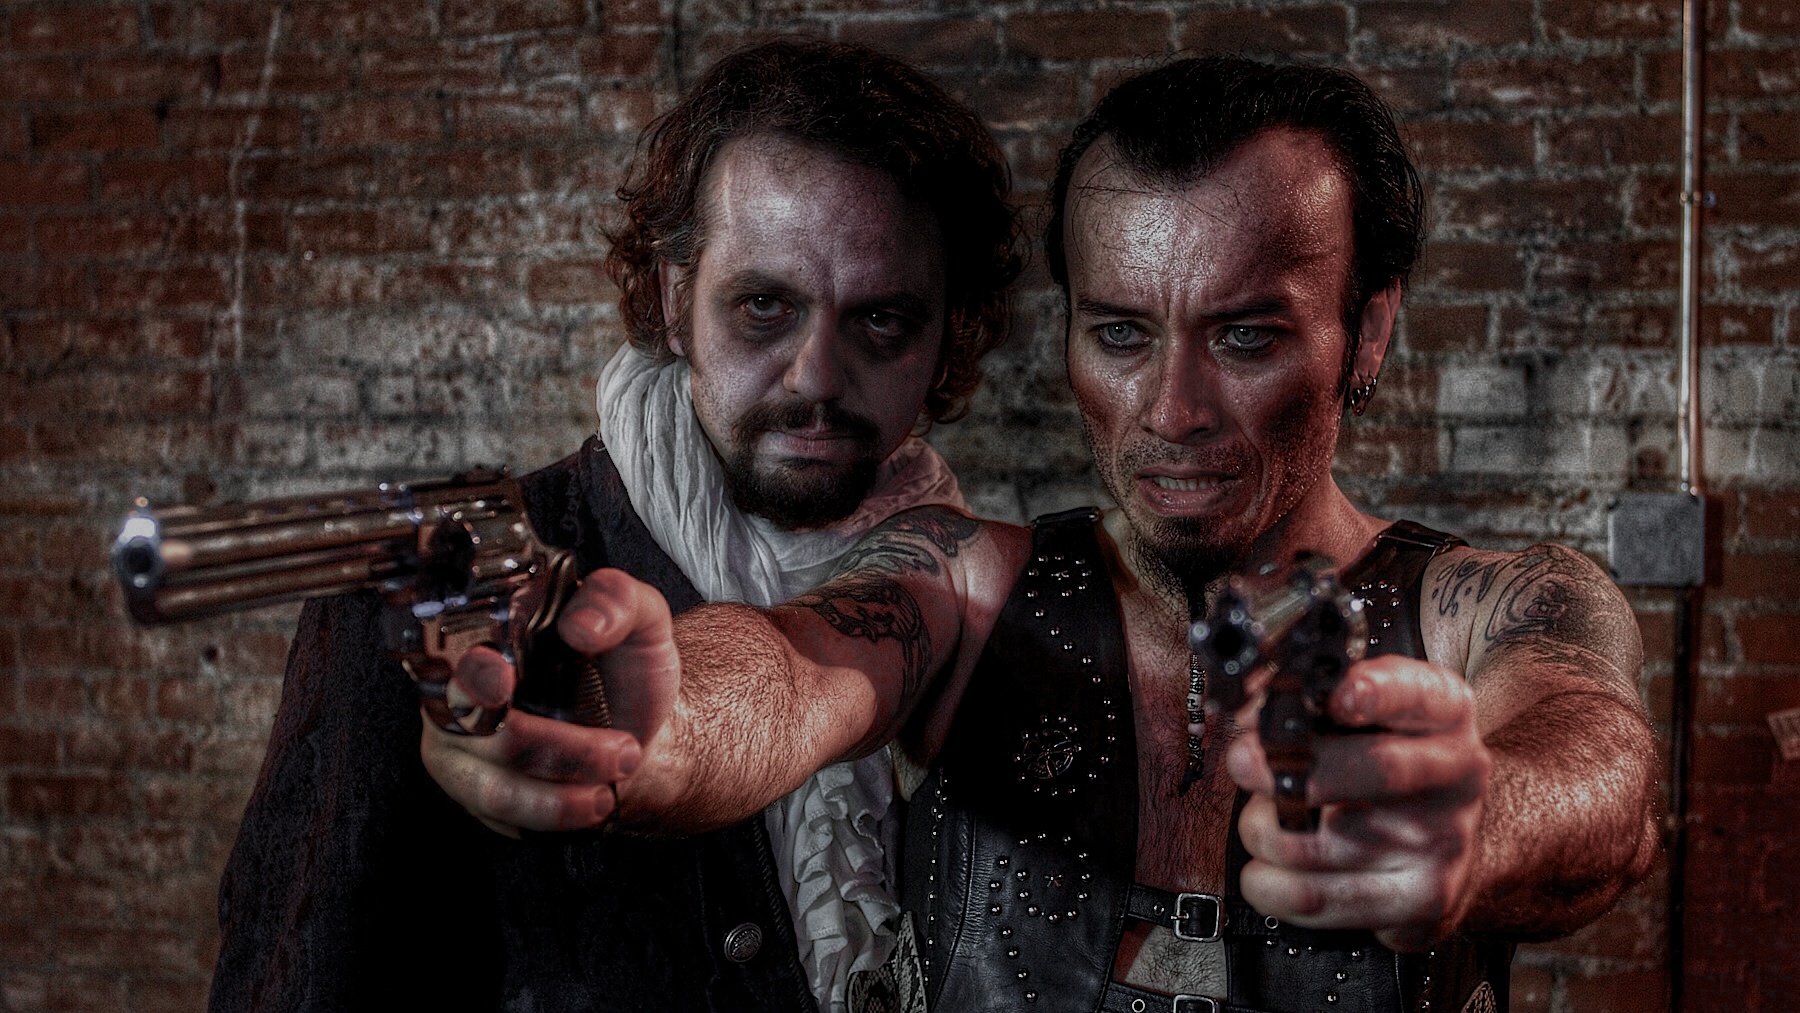 Todd Jenkins as the POET with Billy Blair as the THIEF on the set of BLOOD SOMBRERO.